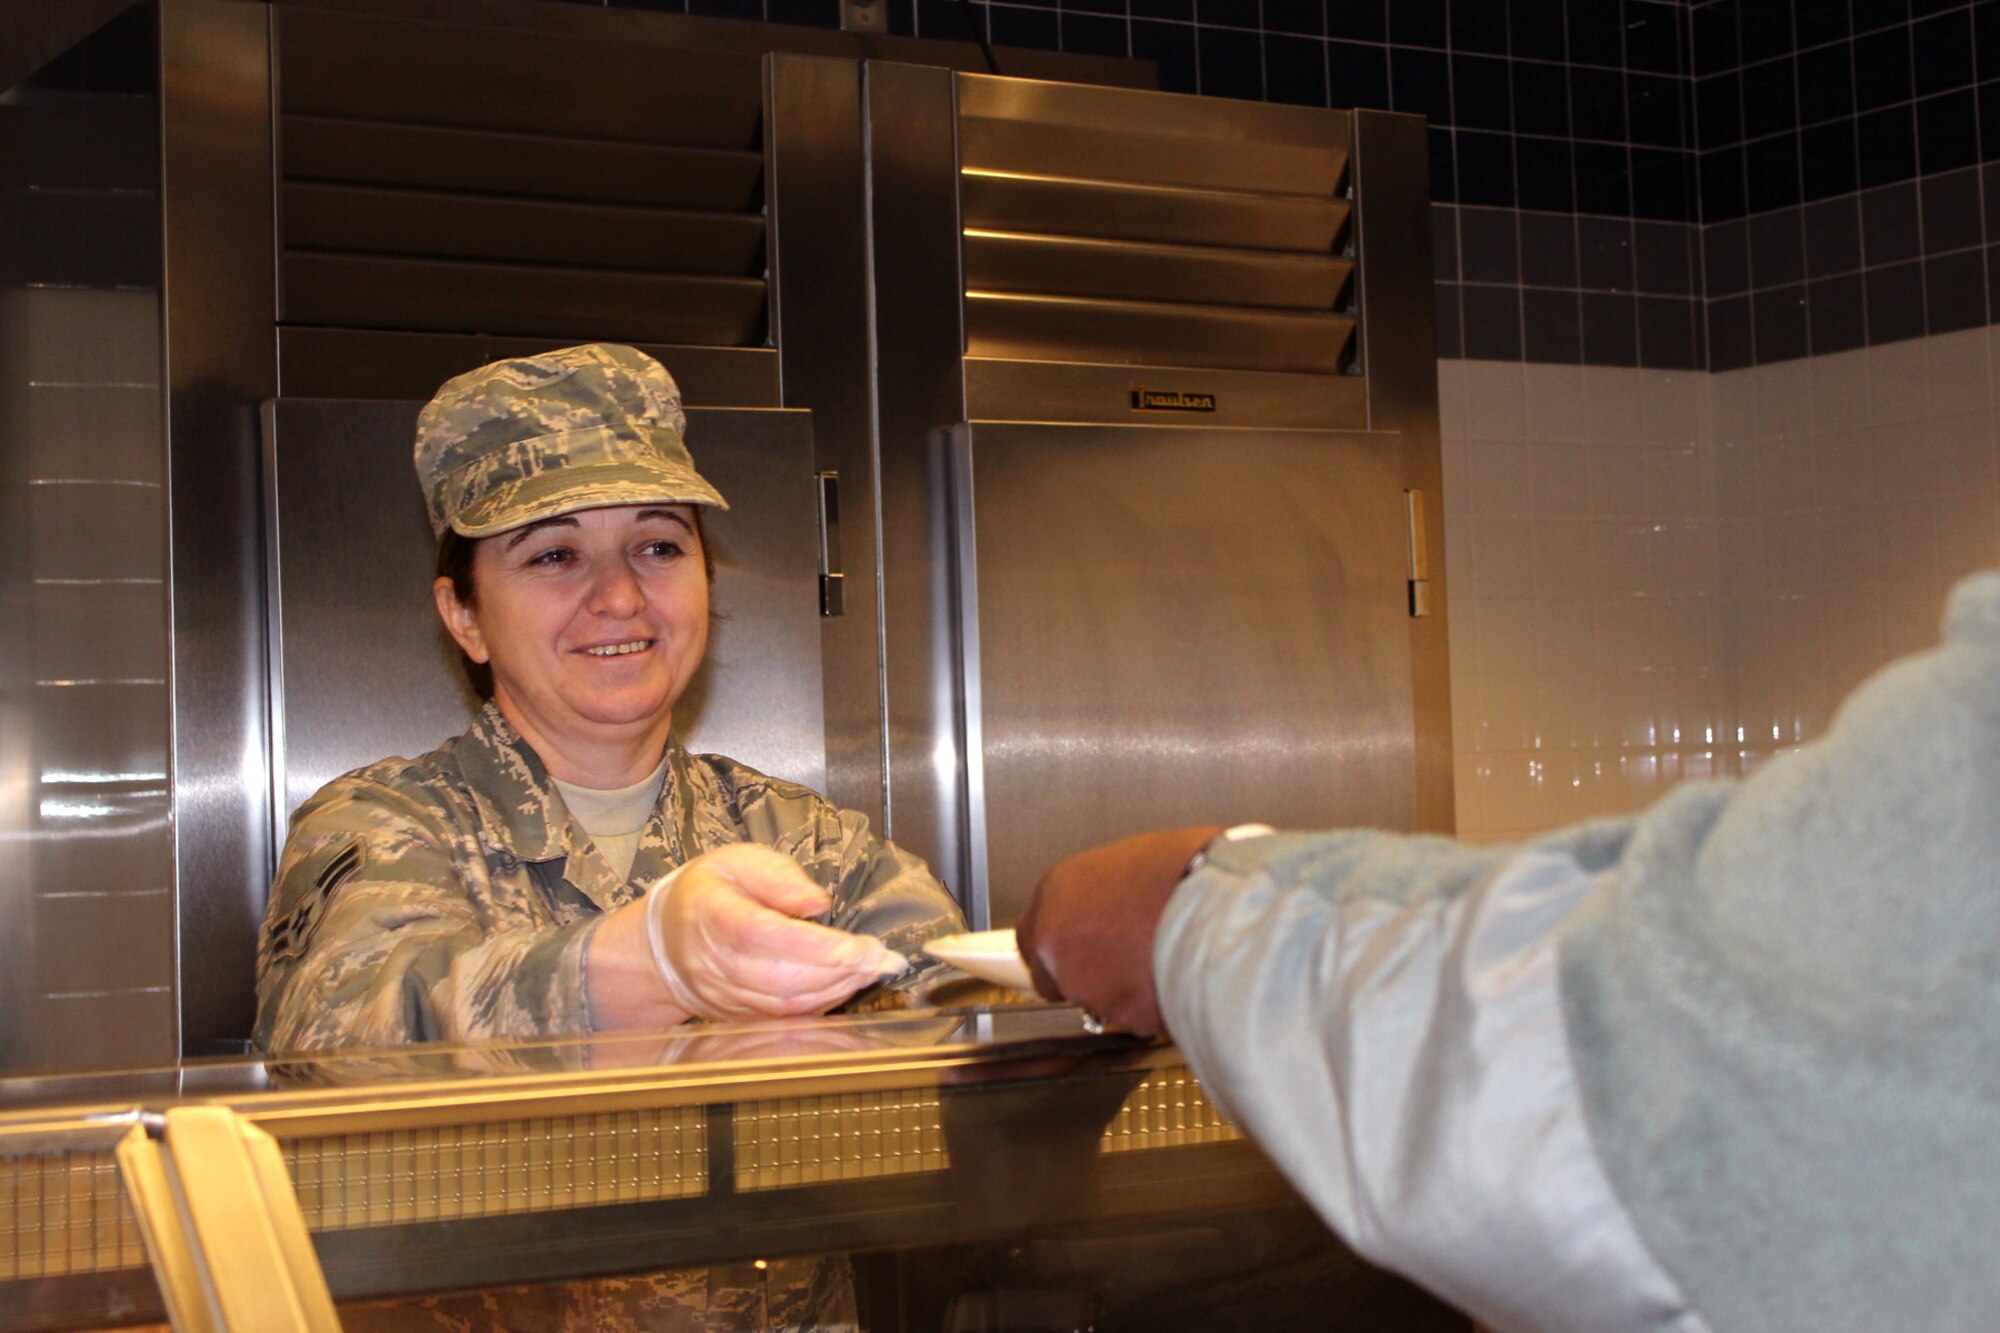 140208-Z-VA676-079 -- Airman 1st Class Elvira Shani serves an Airman during lunch at the Dining Facility at Selfridge Air National Guard Base, Mich., Feb. 8, 2014. Shani, a native of Albania, joined the Air National Guard on the day before her 40th birthday – the last day she was eligible to join – as a way to say thank you to America for the opportunities she has found since to immigrated to the U.S. about 10 years ago. (U.S. Air National Guard photo by TSgt. Dan Heaton / Released)